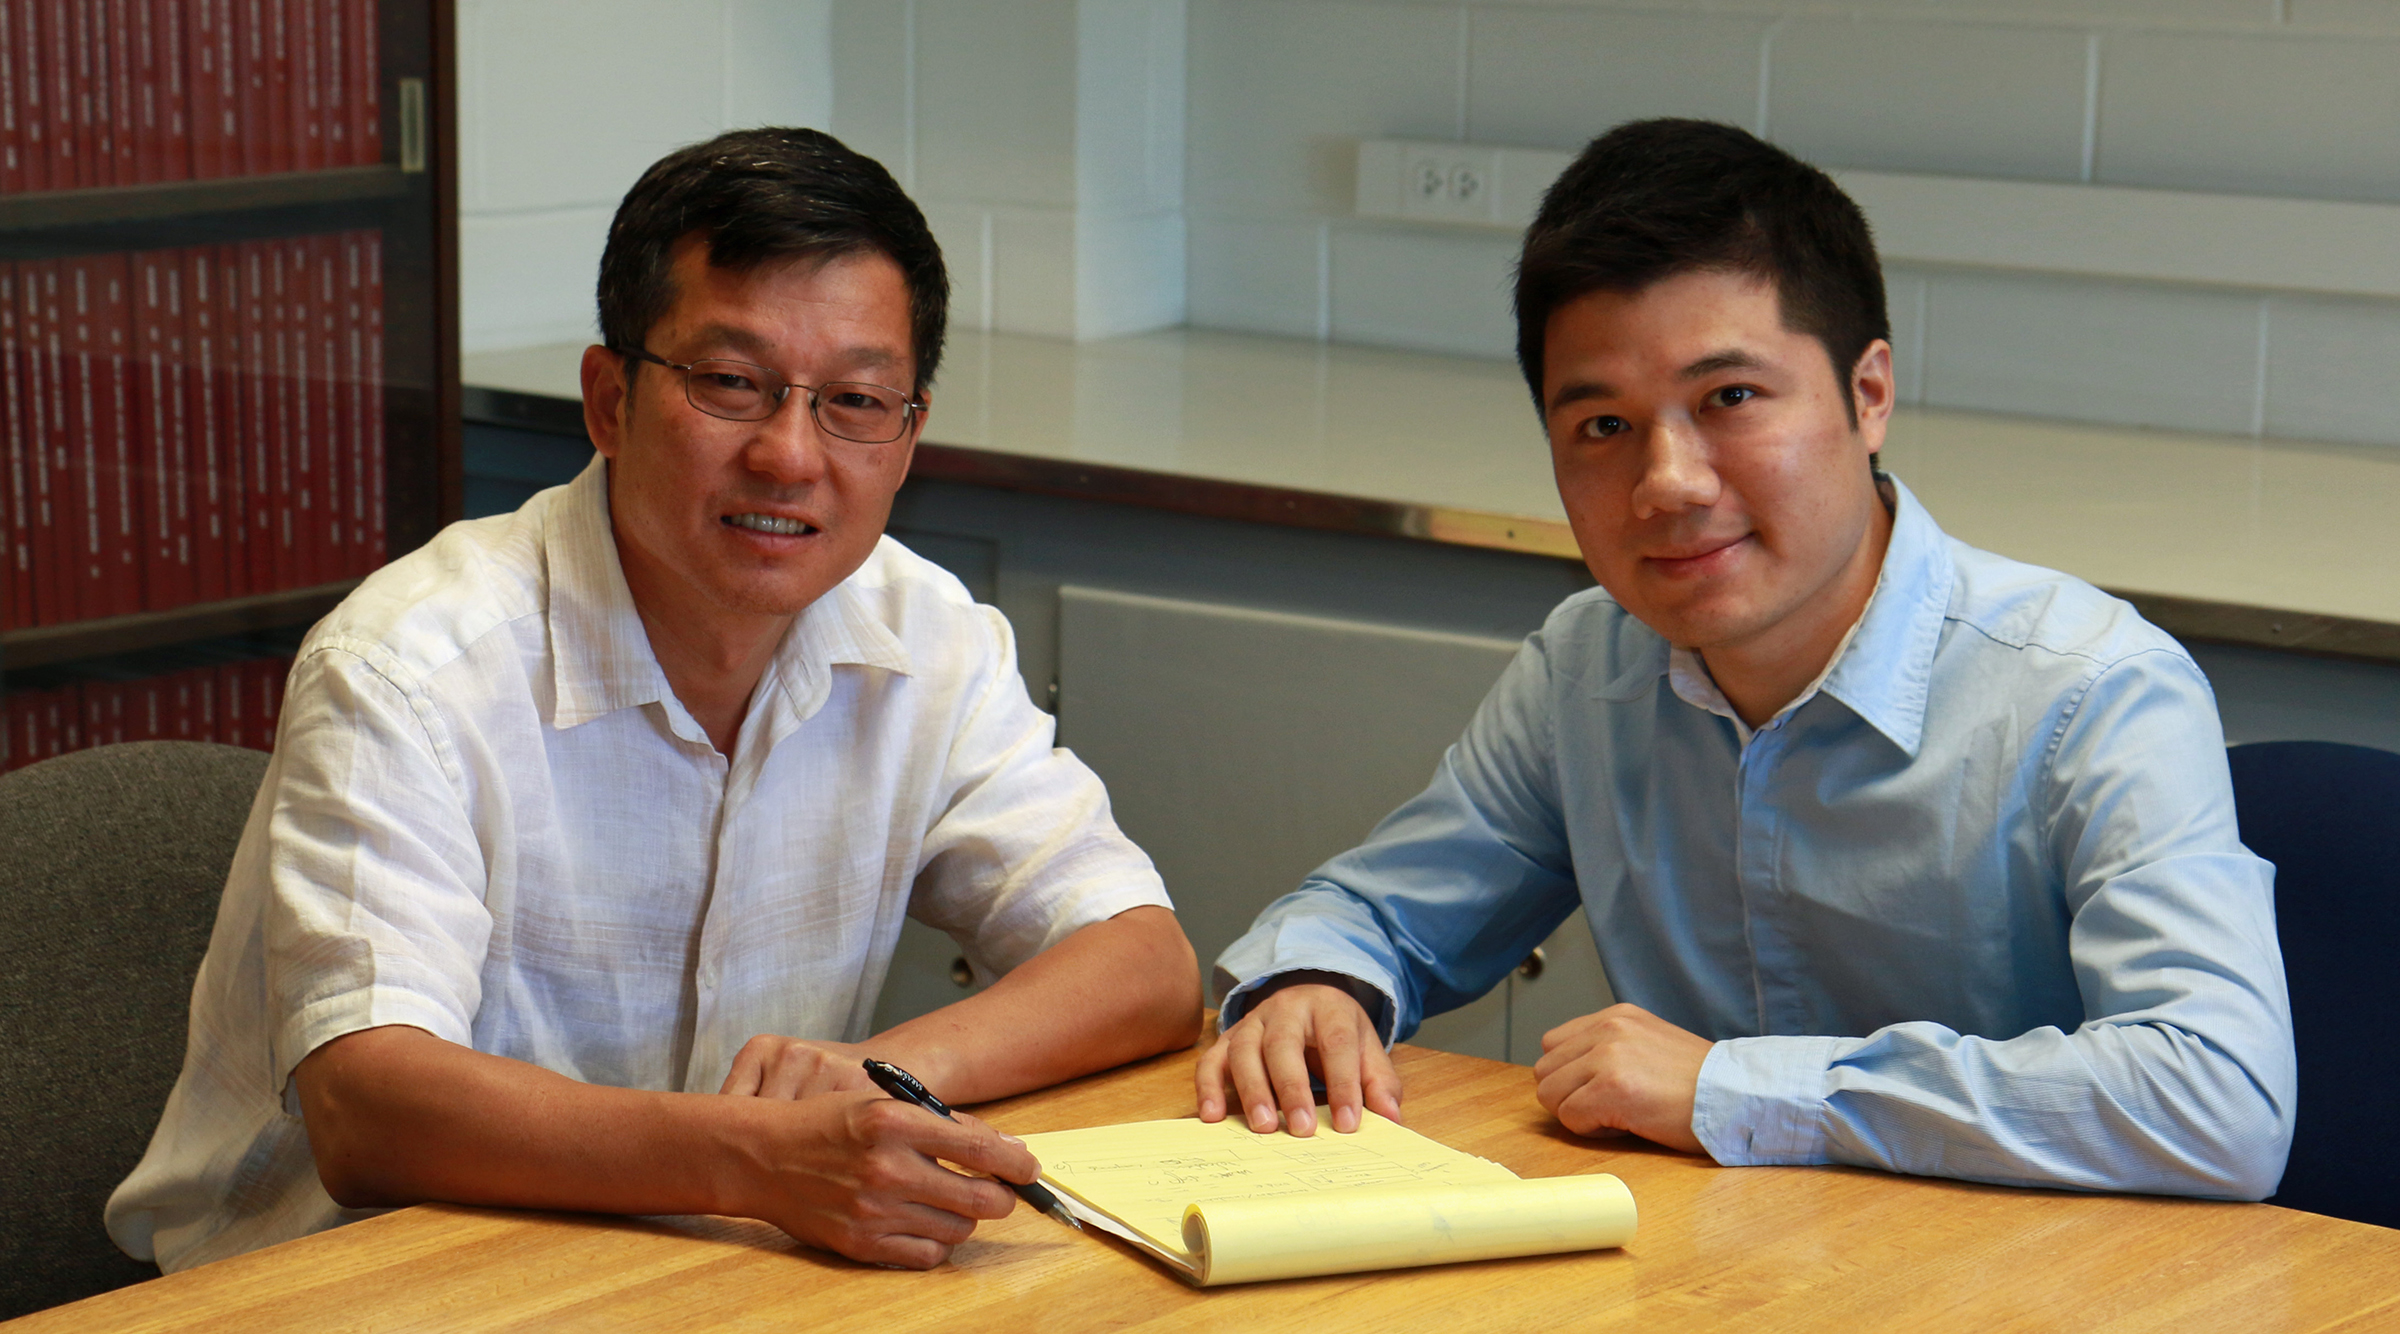 Feng Liu (left), chair of the University of Utah Department of Materials Science and Engineering, and Miao Zhou, a postdoctoral fellow, co-authored a study of a new “topological insulator” that could lead theoretically to faster computing.